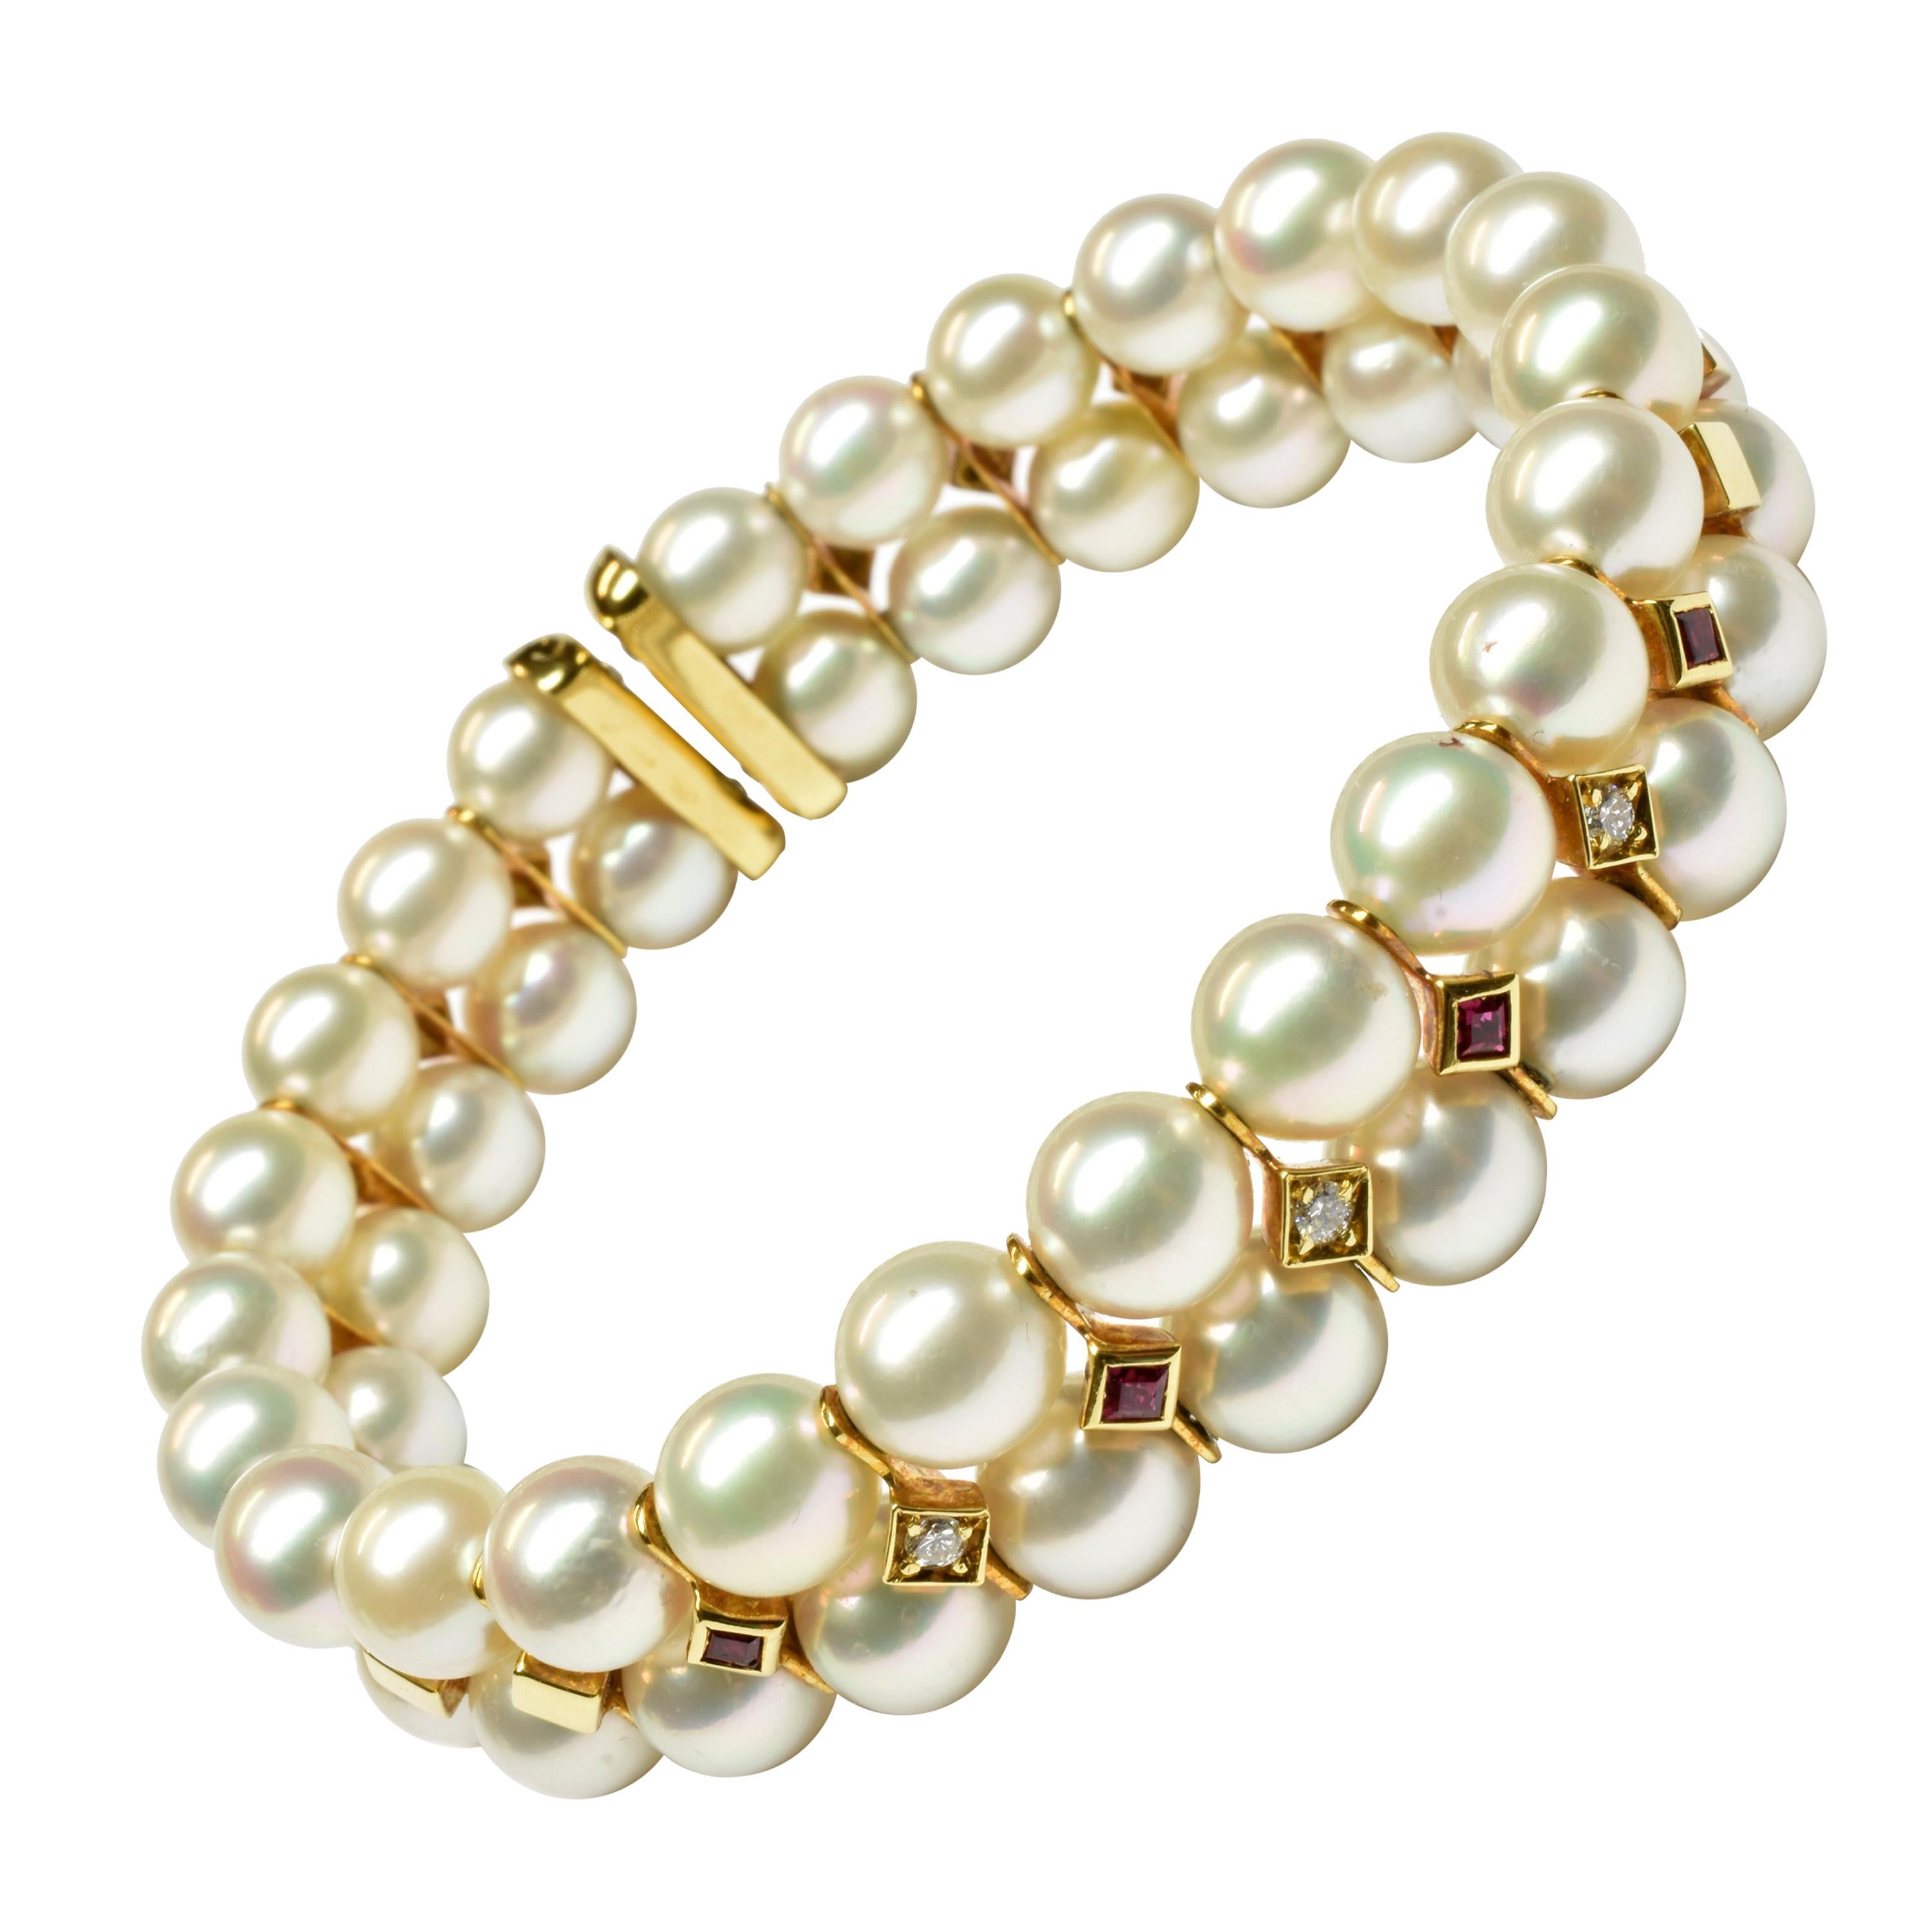 Japanese Akoya Pearls with Rubies and Diamonds Gold Bracelet